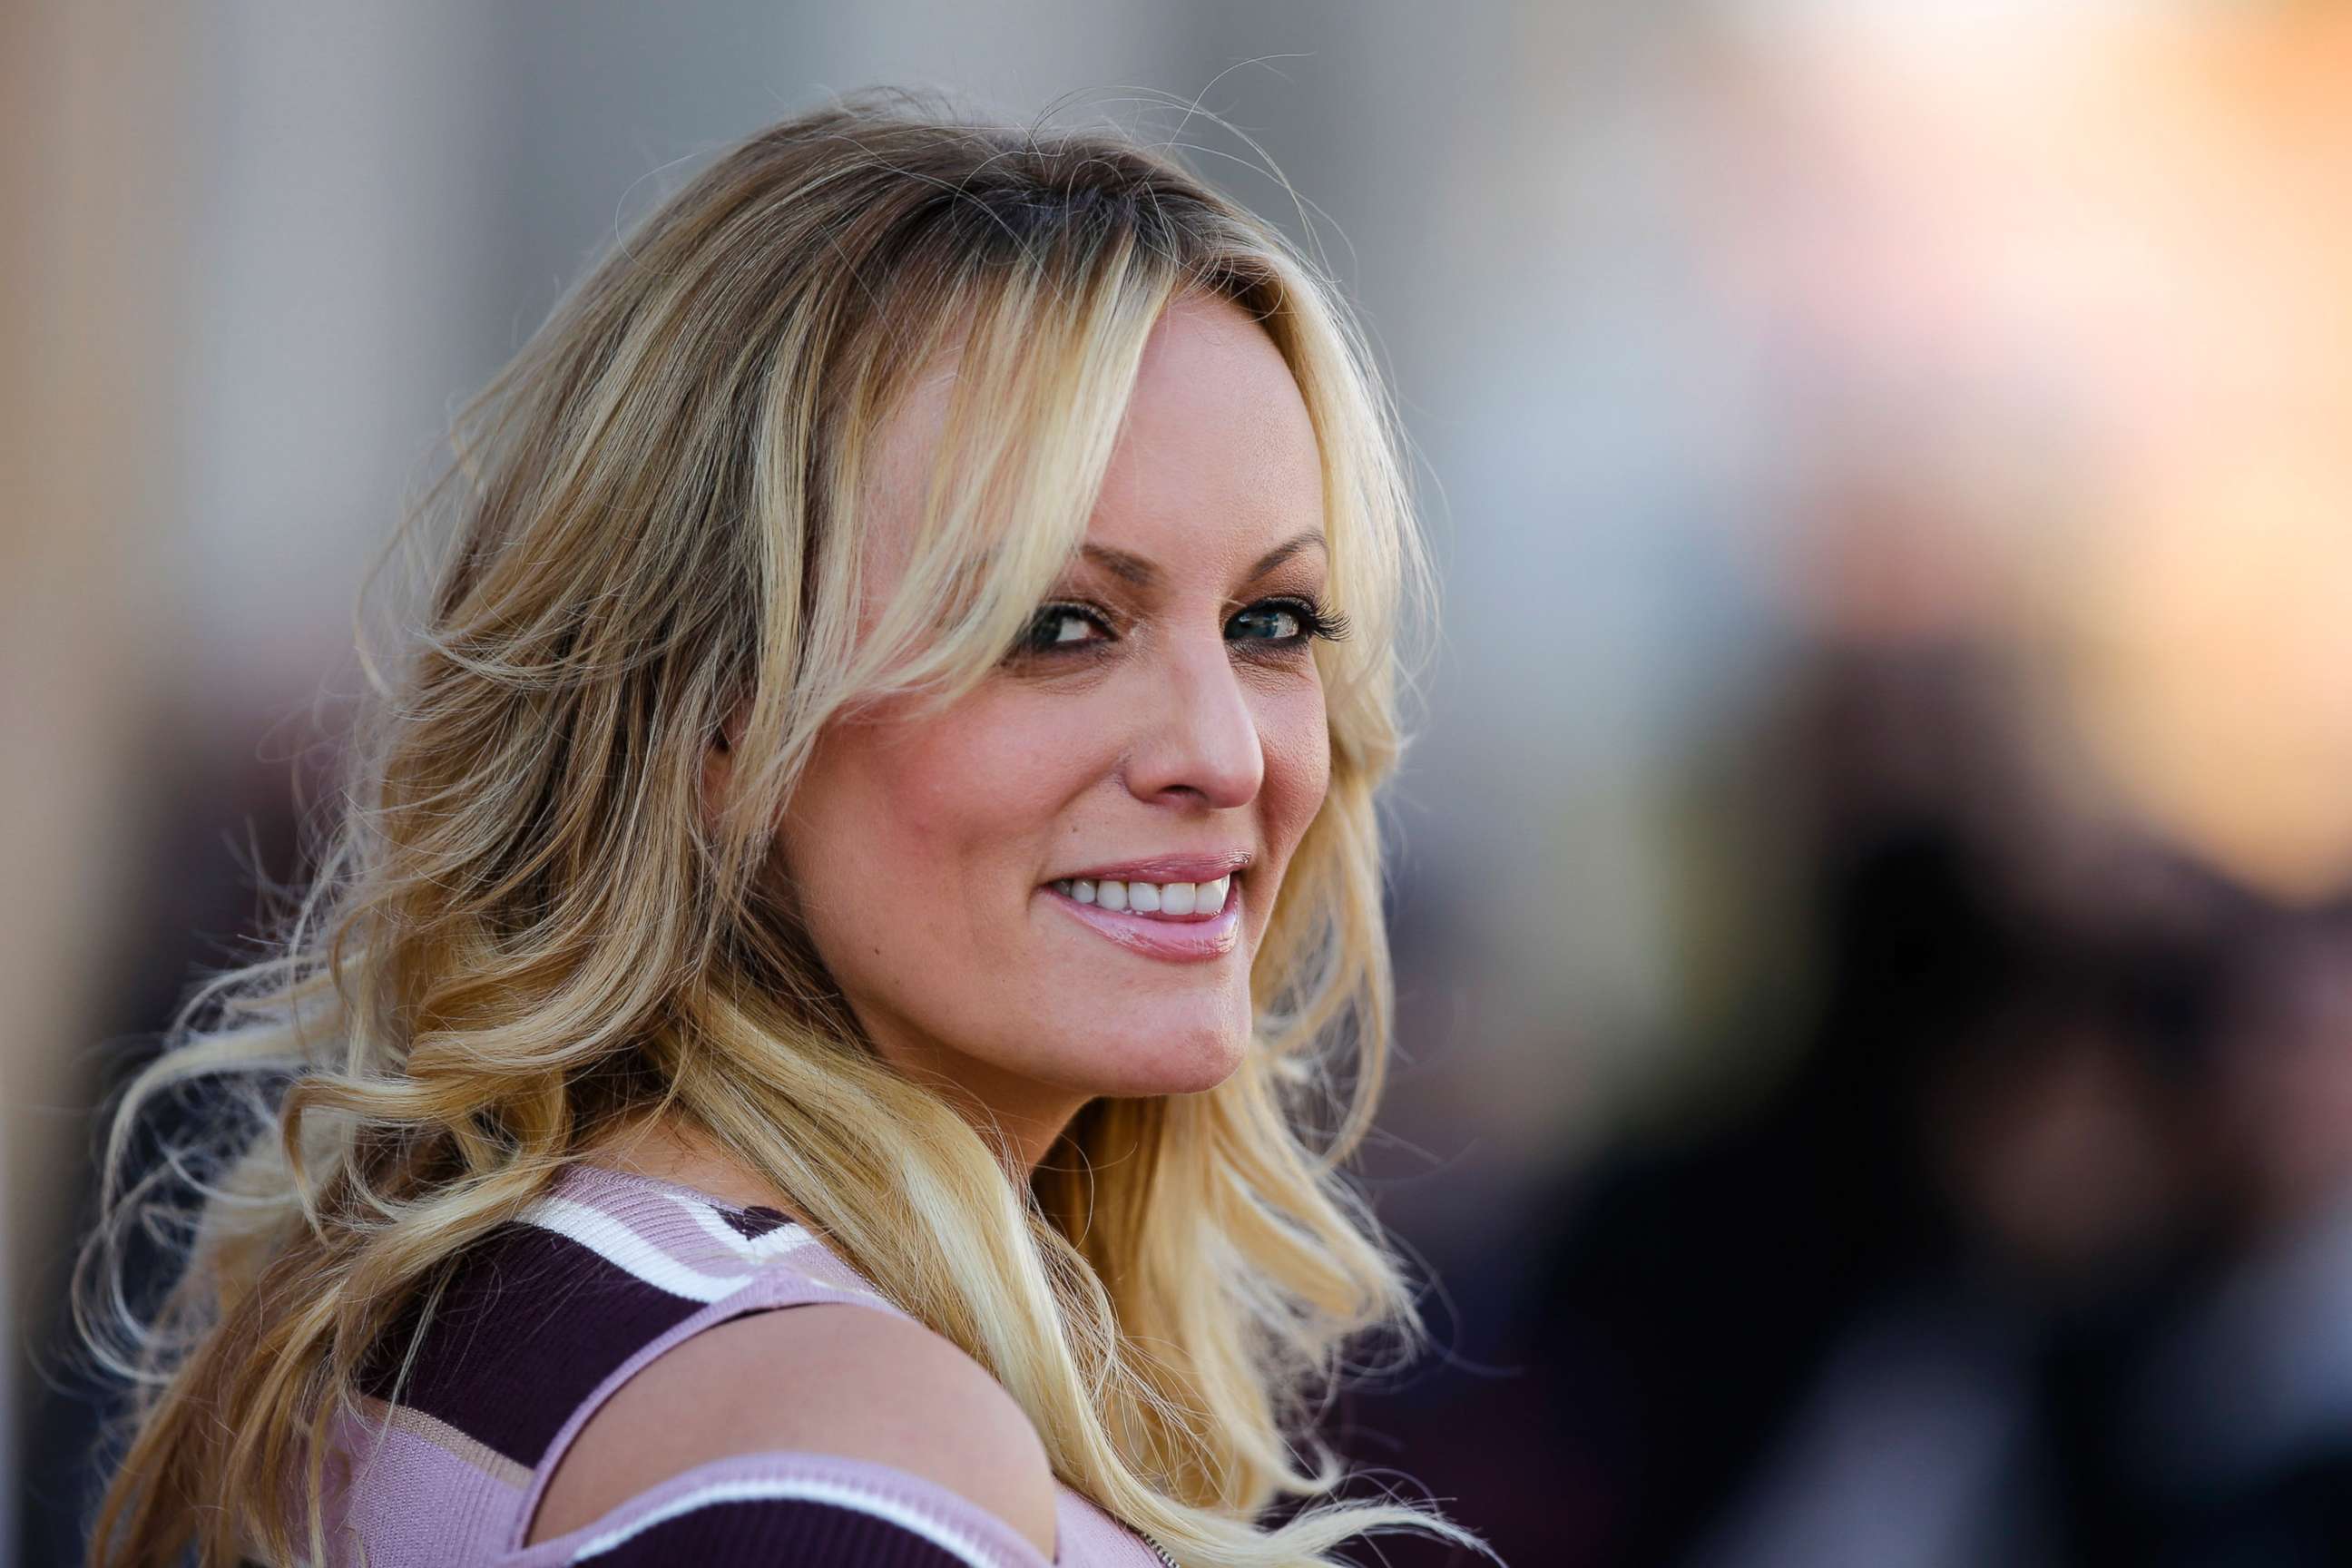 PHOTO: Adult film actress Stormy Daniels attends an event in Berlin, Oct. 11, 2018.